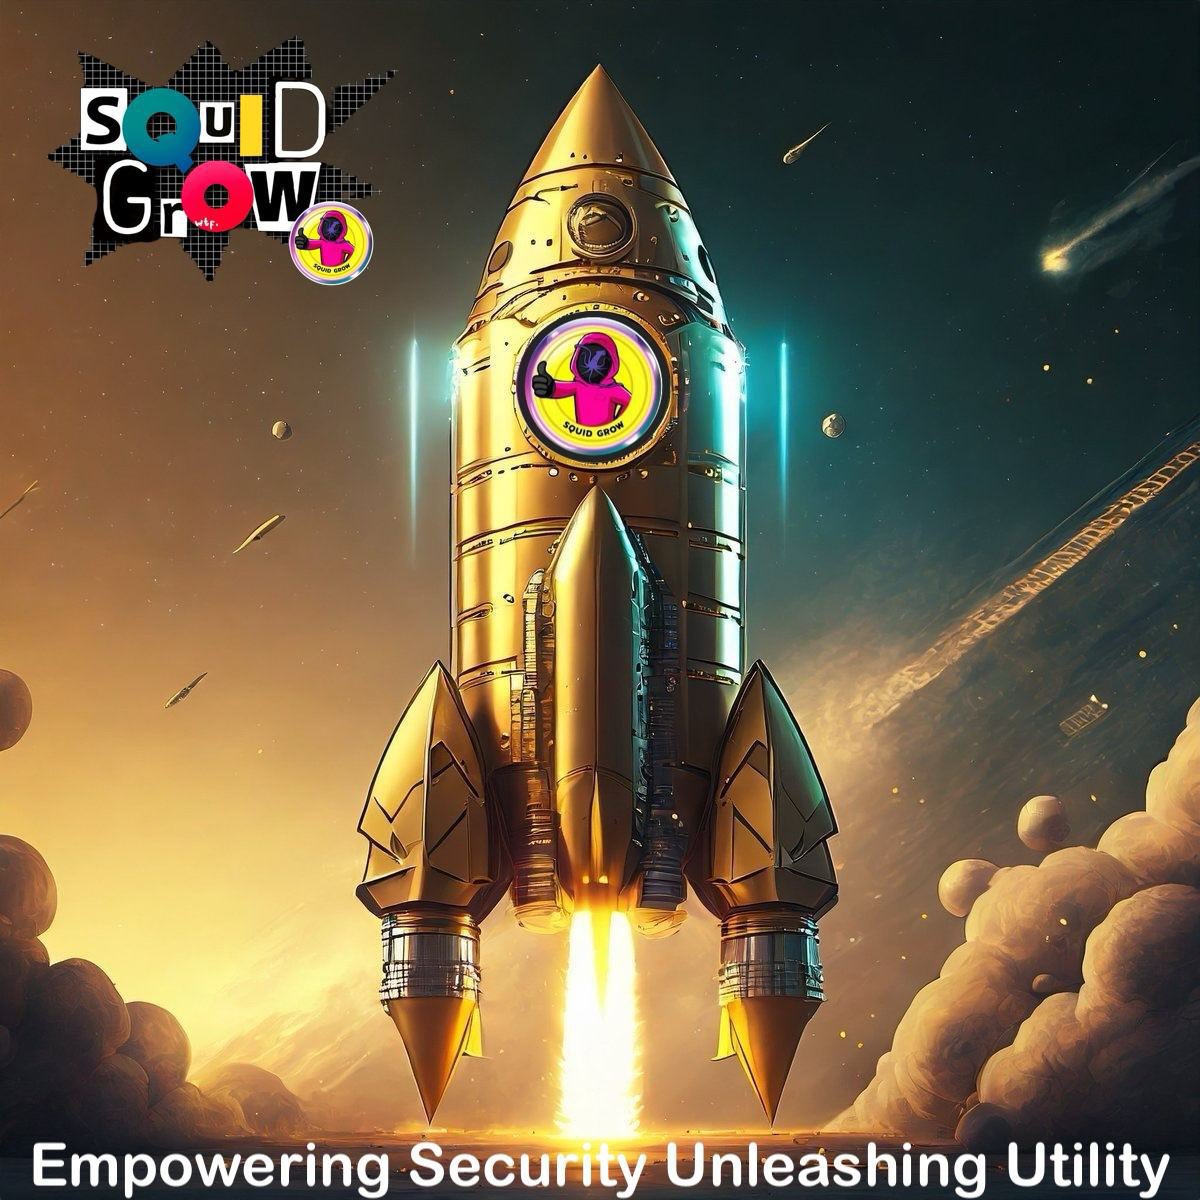 @RoarWeb3 With an incredible team led by @Shibtoshi_SG, along with amazing projects and a thriving community, this is a recipe for success in the world of #crypto💥

#SquidGrow is one to watch, an investment now could be a game-changer! 🚀
@Squid_Grow